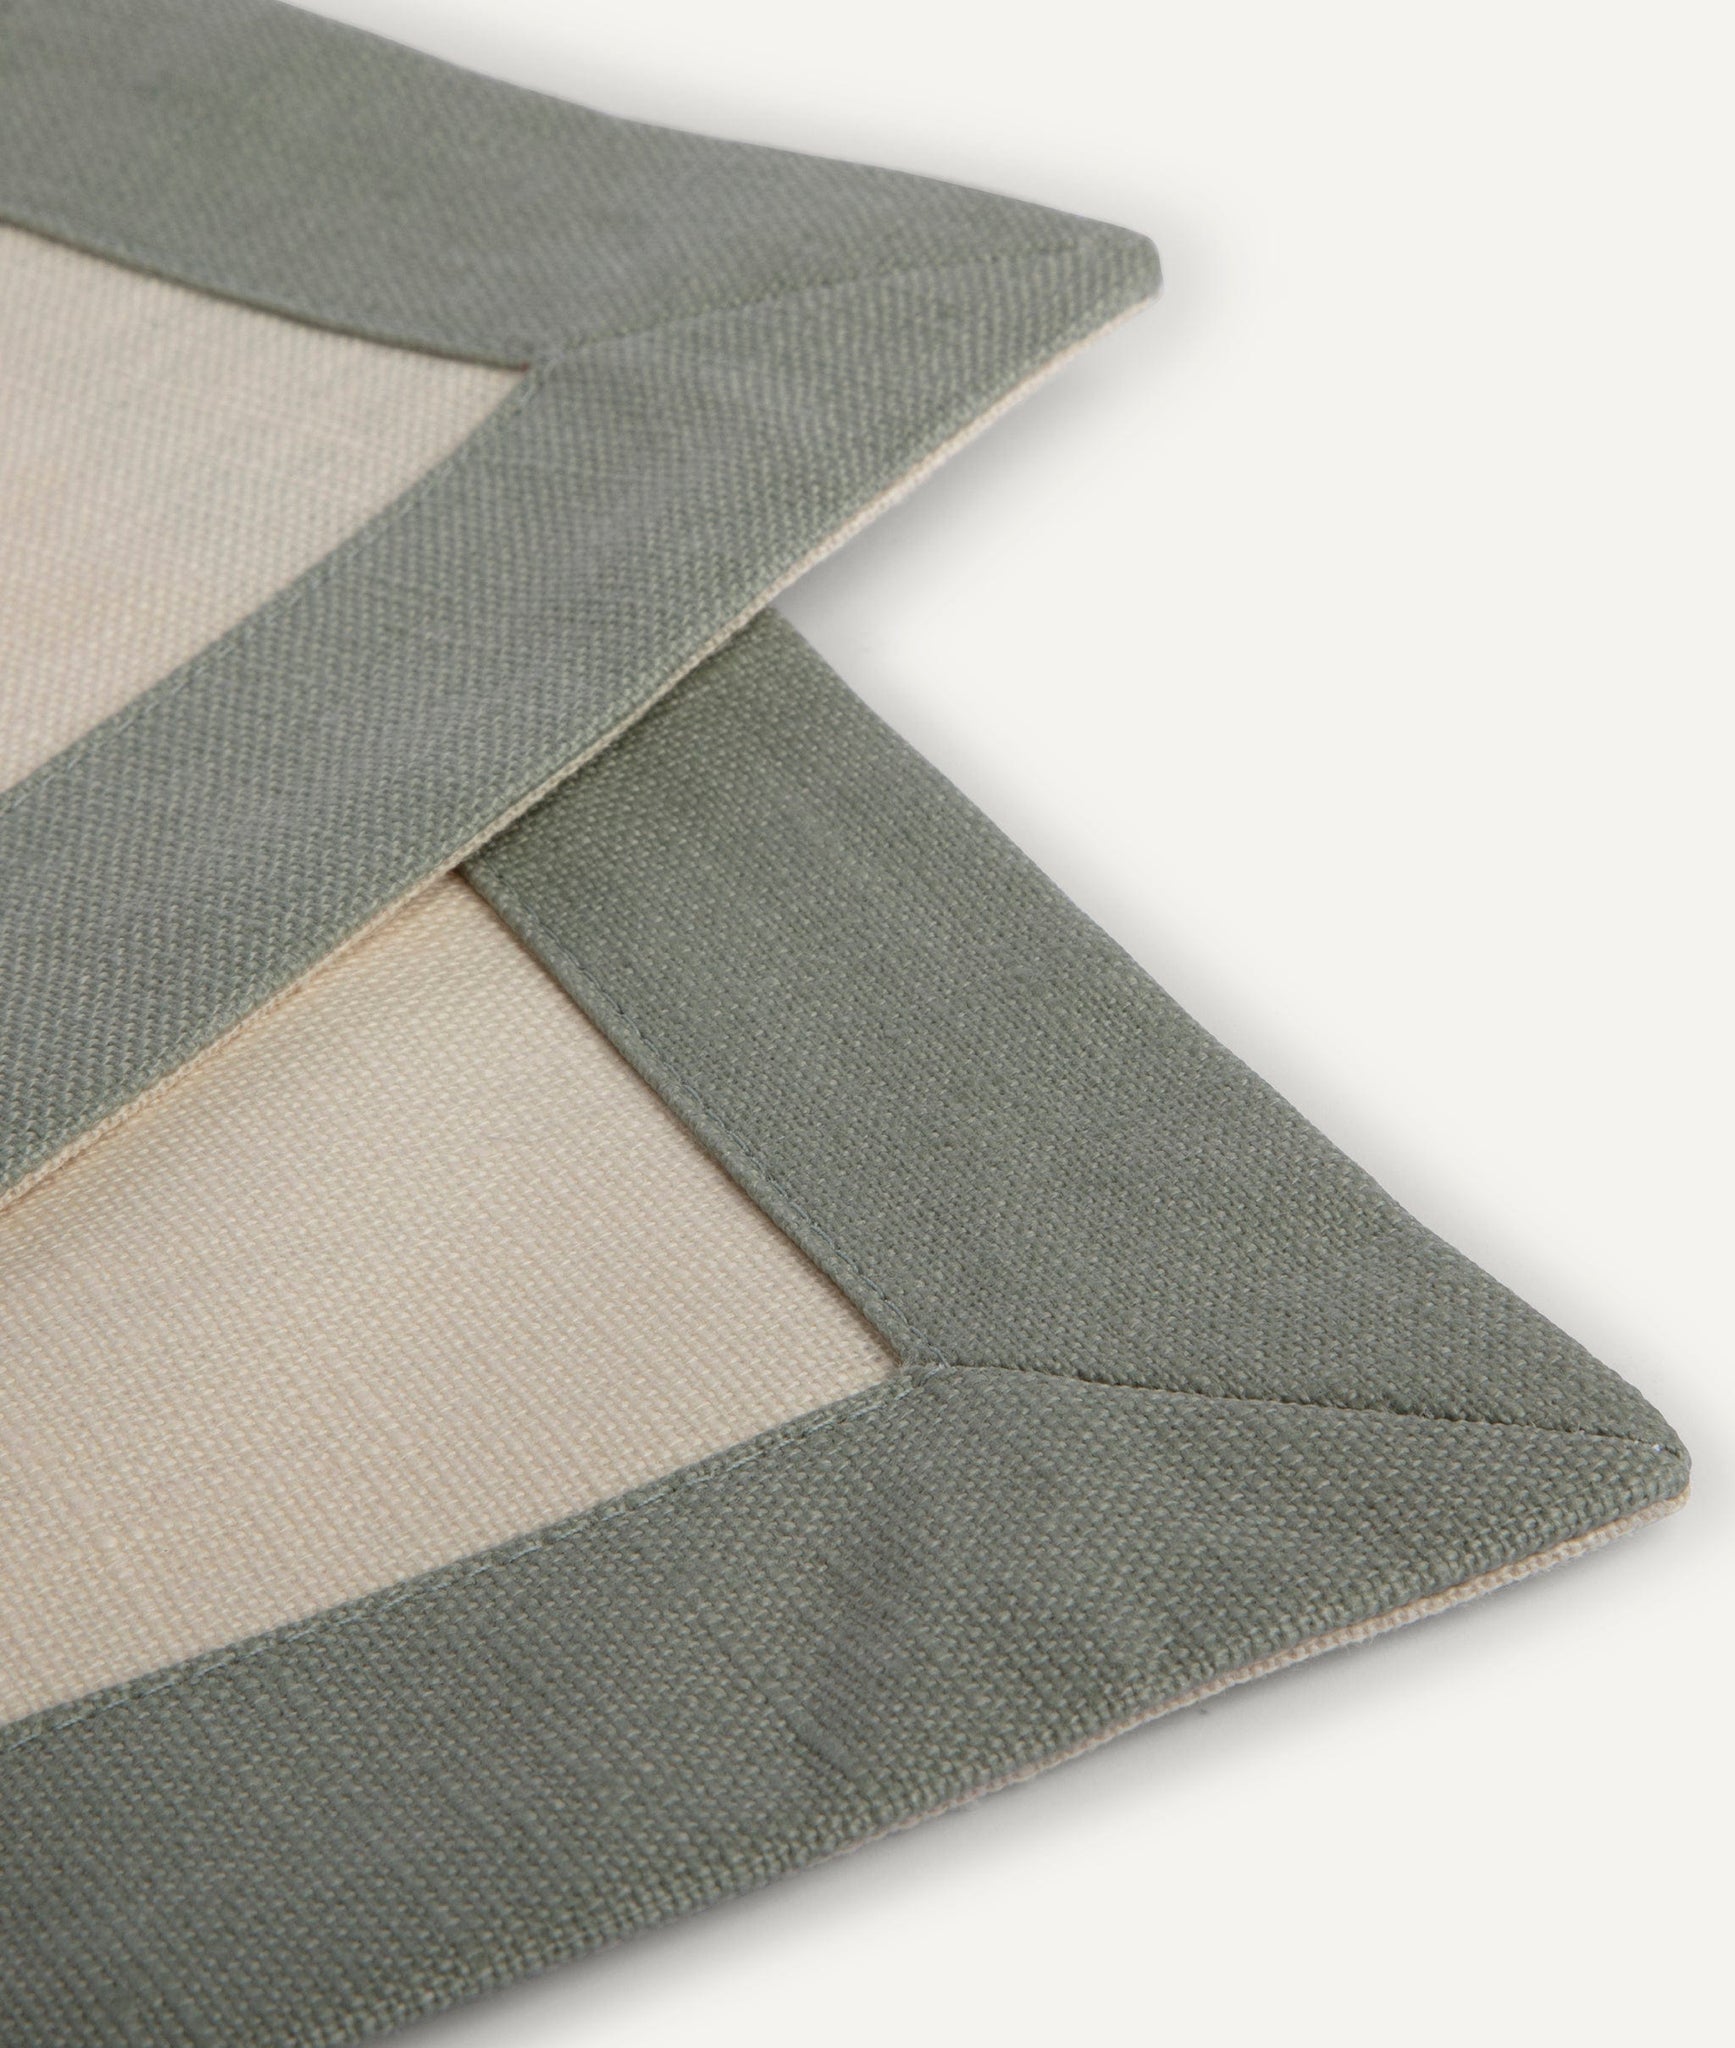 Placemat in Linen - Set of 2